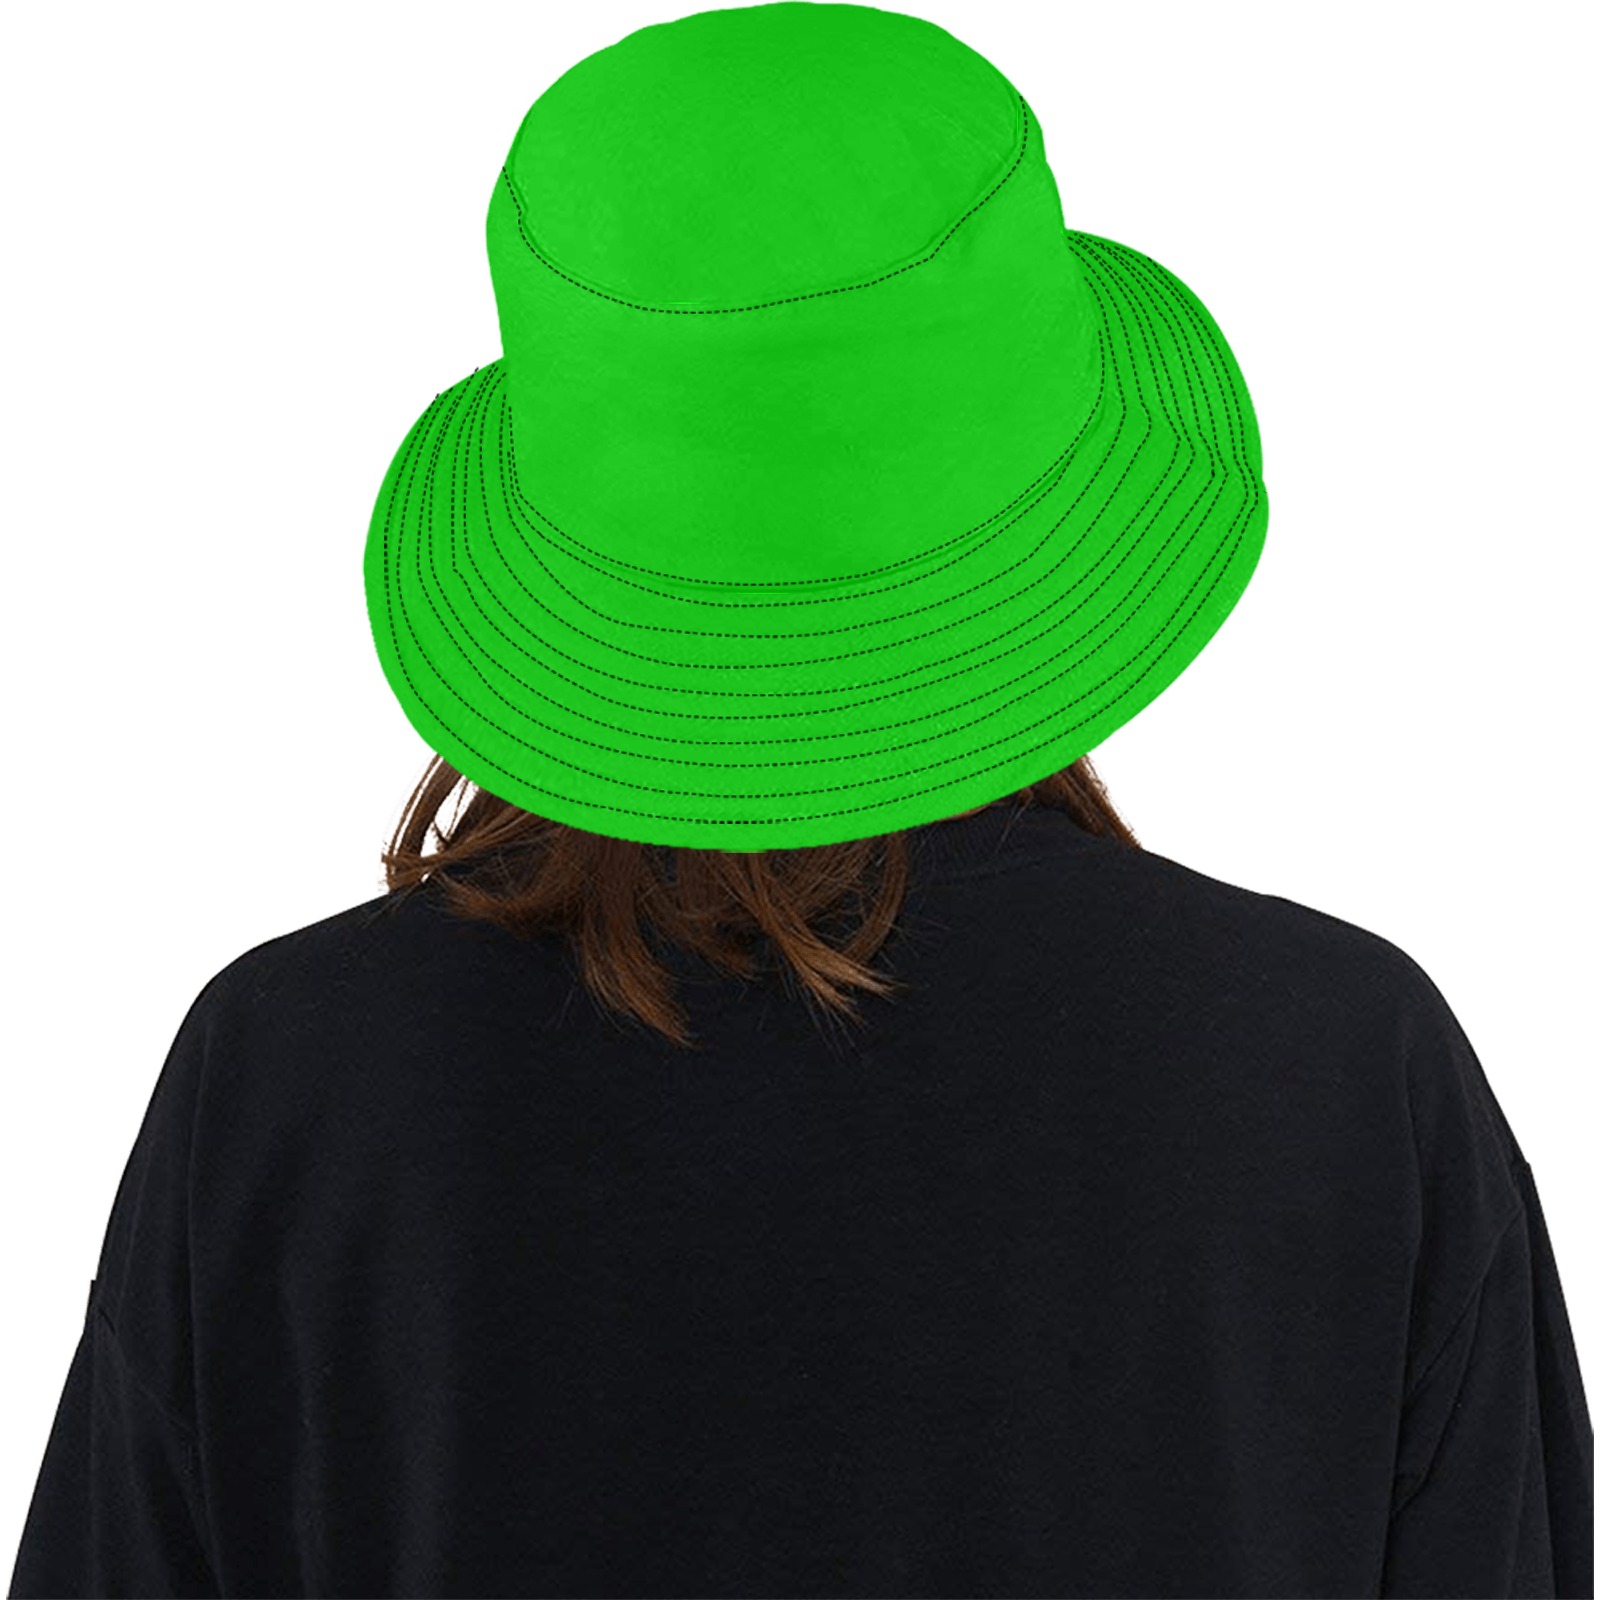 Merry Christmas Green Solid Color Unisex Summer Bucket Hat